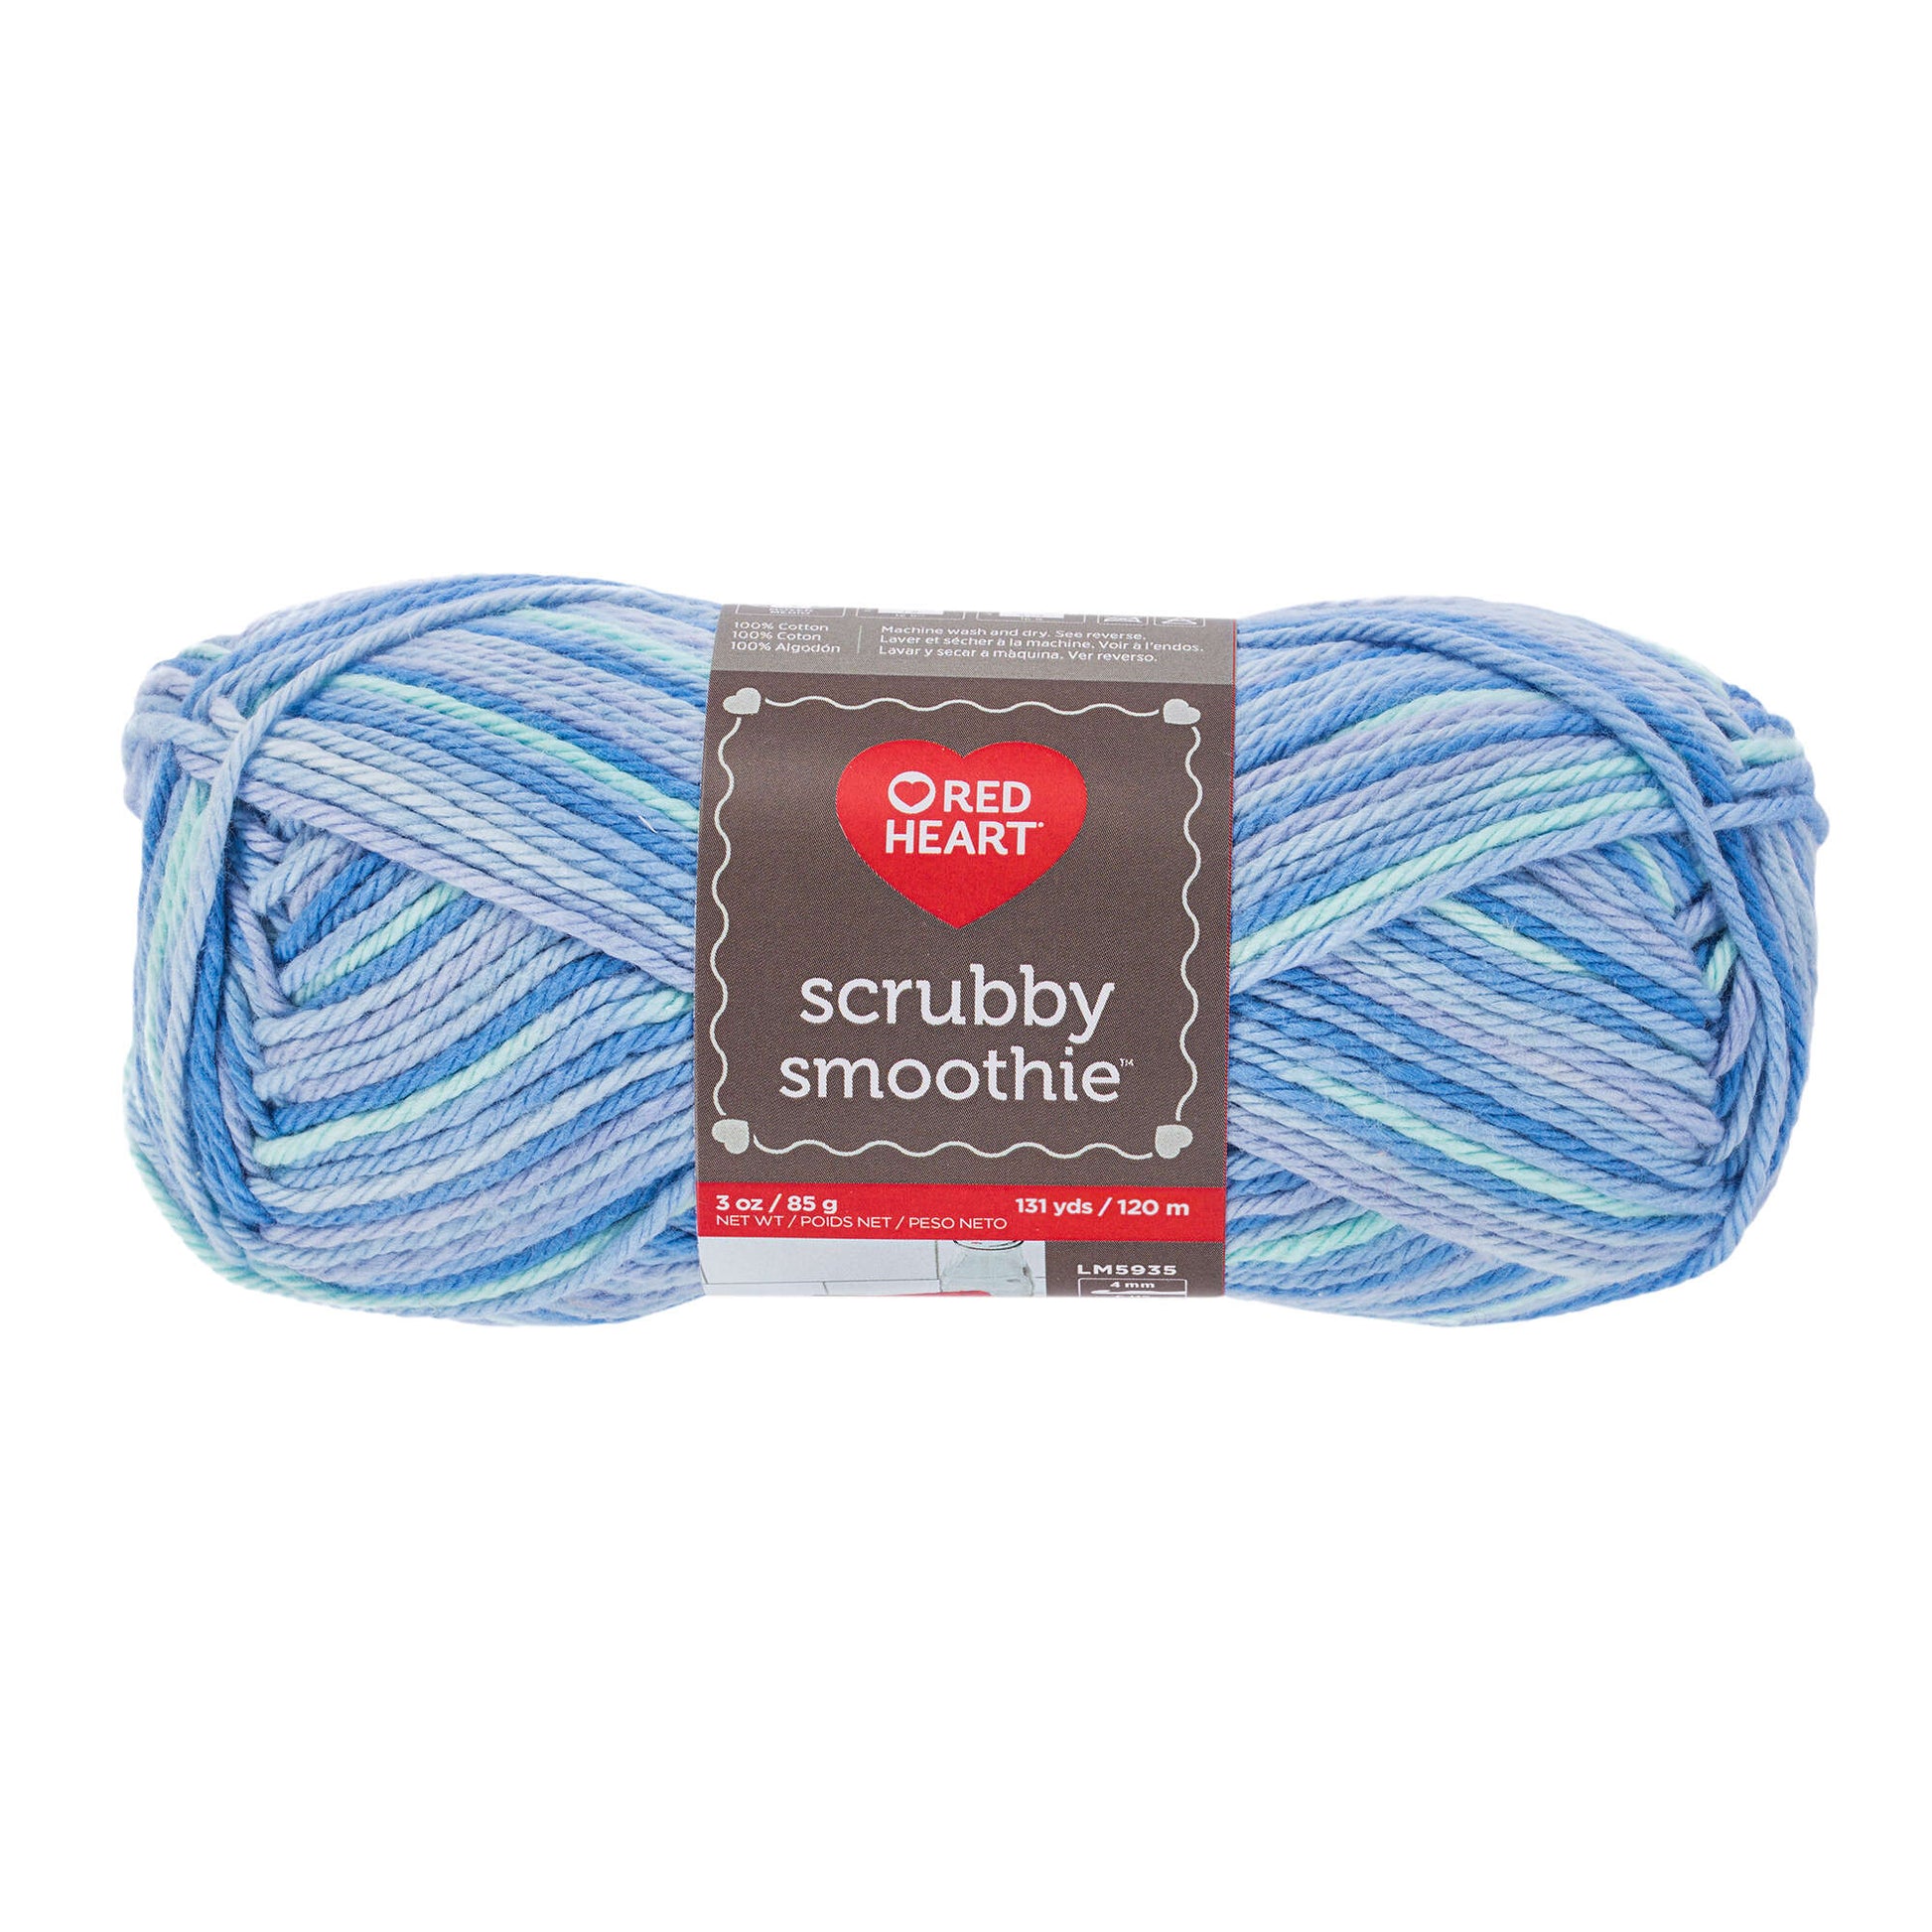 Red Heart Scrubby Smoothie Yarn - Clearance shades Ocean